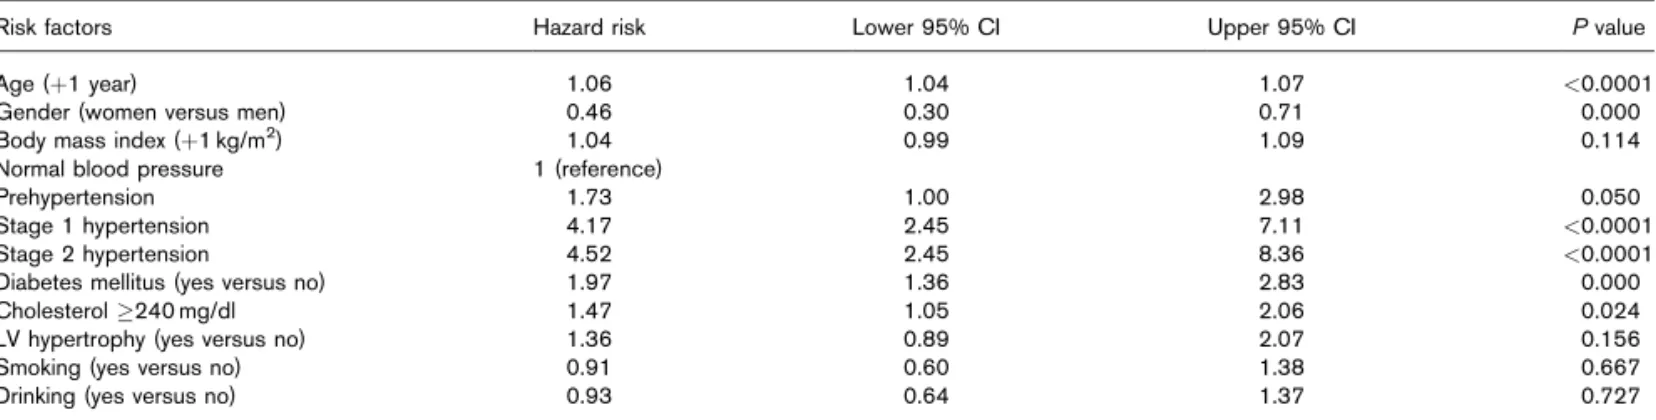 Table 3 Model for risk factor profiles to predict cardiovascular events in the Chin-Shan Community Cardiovascular Cohort (CCCC) study, Taiwan